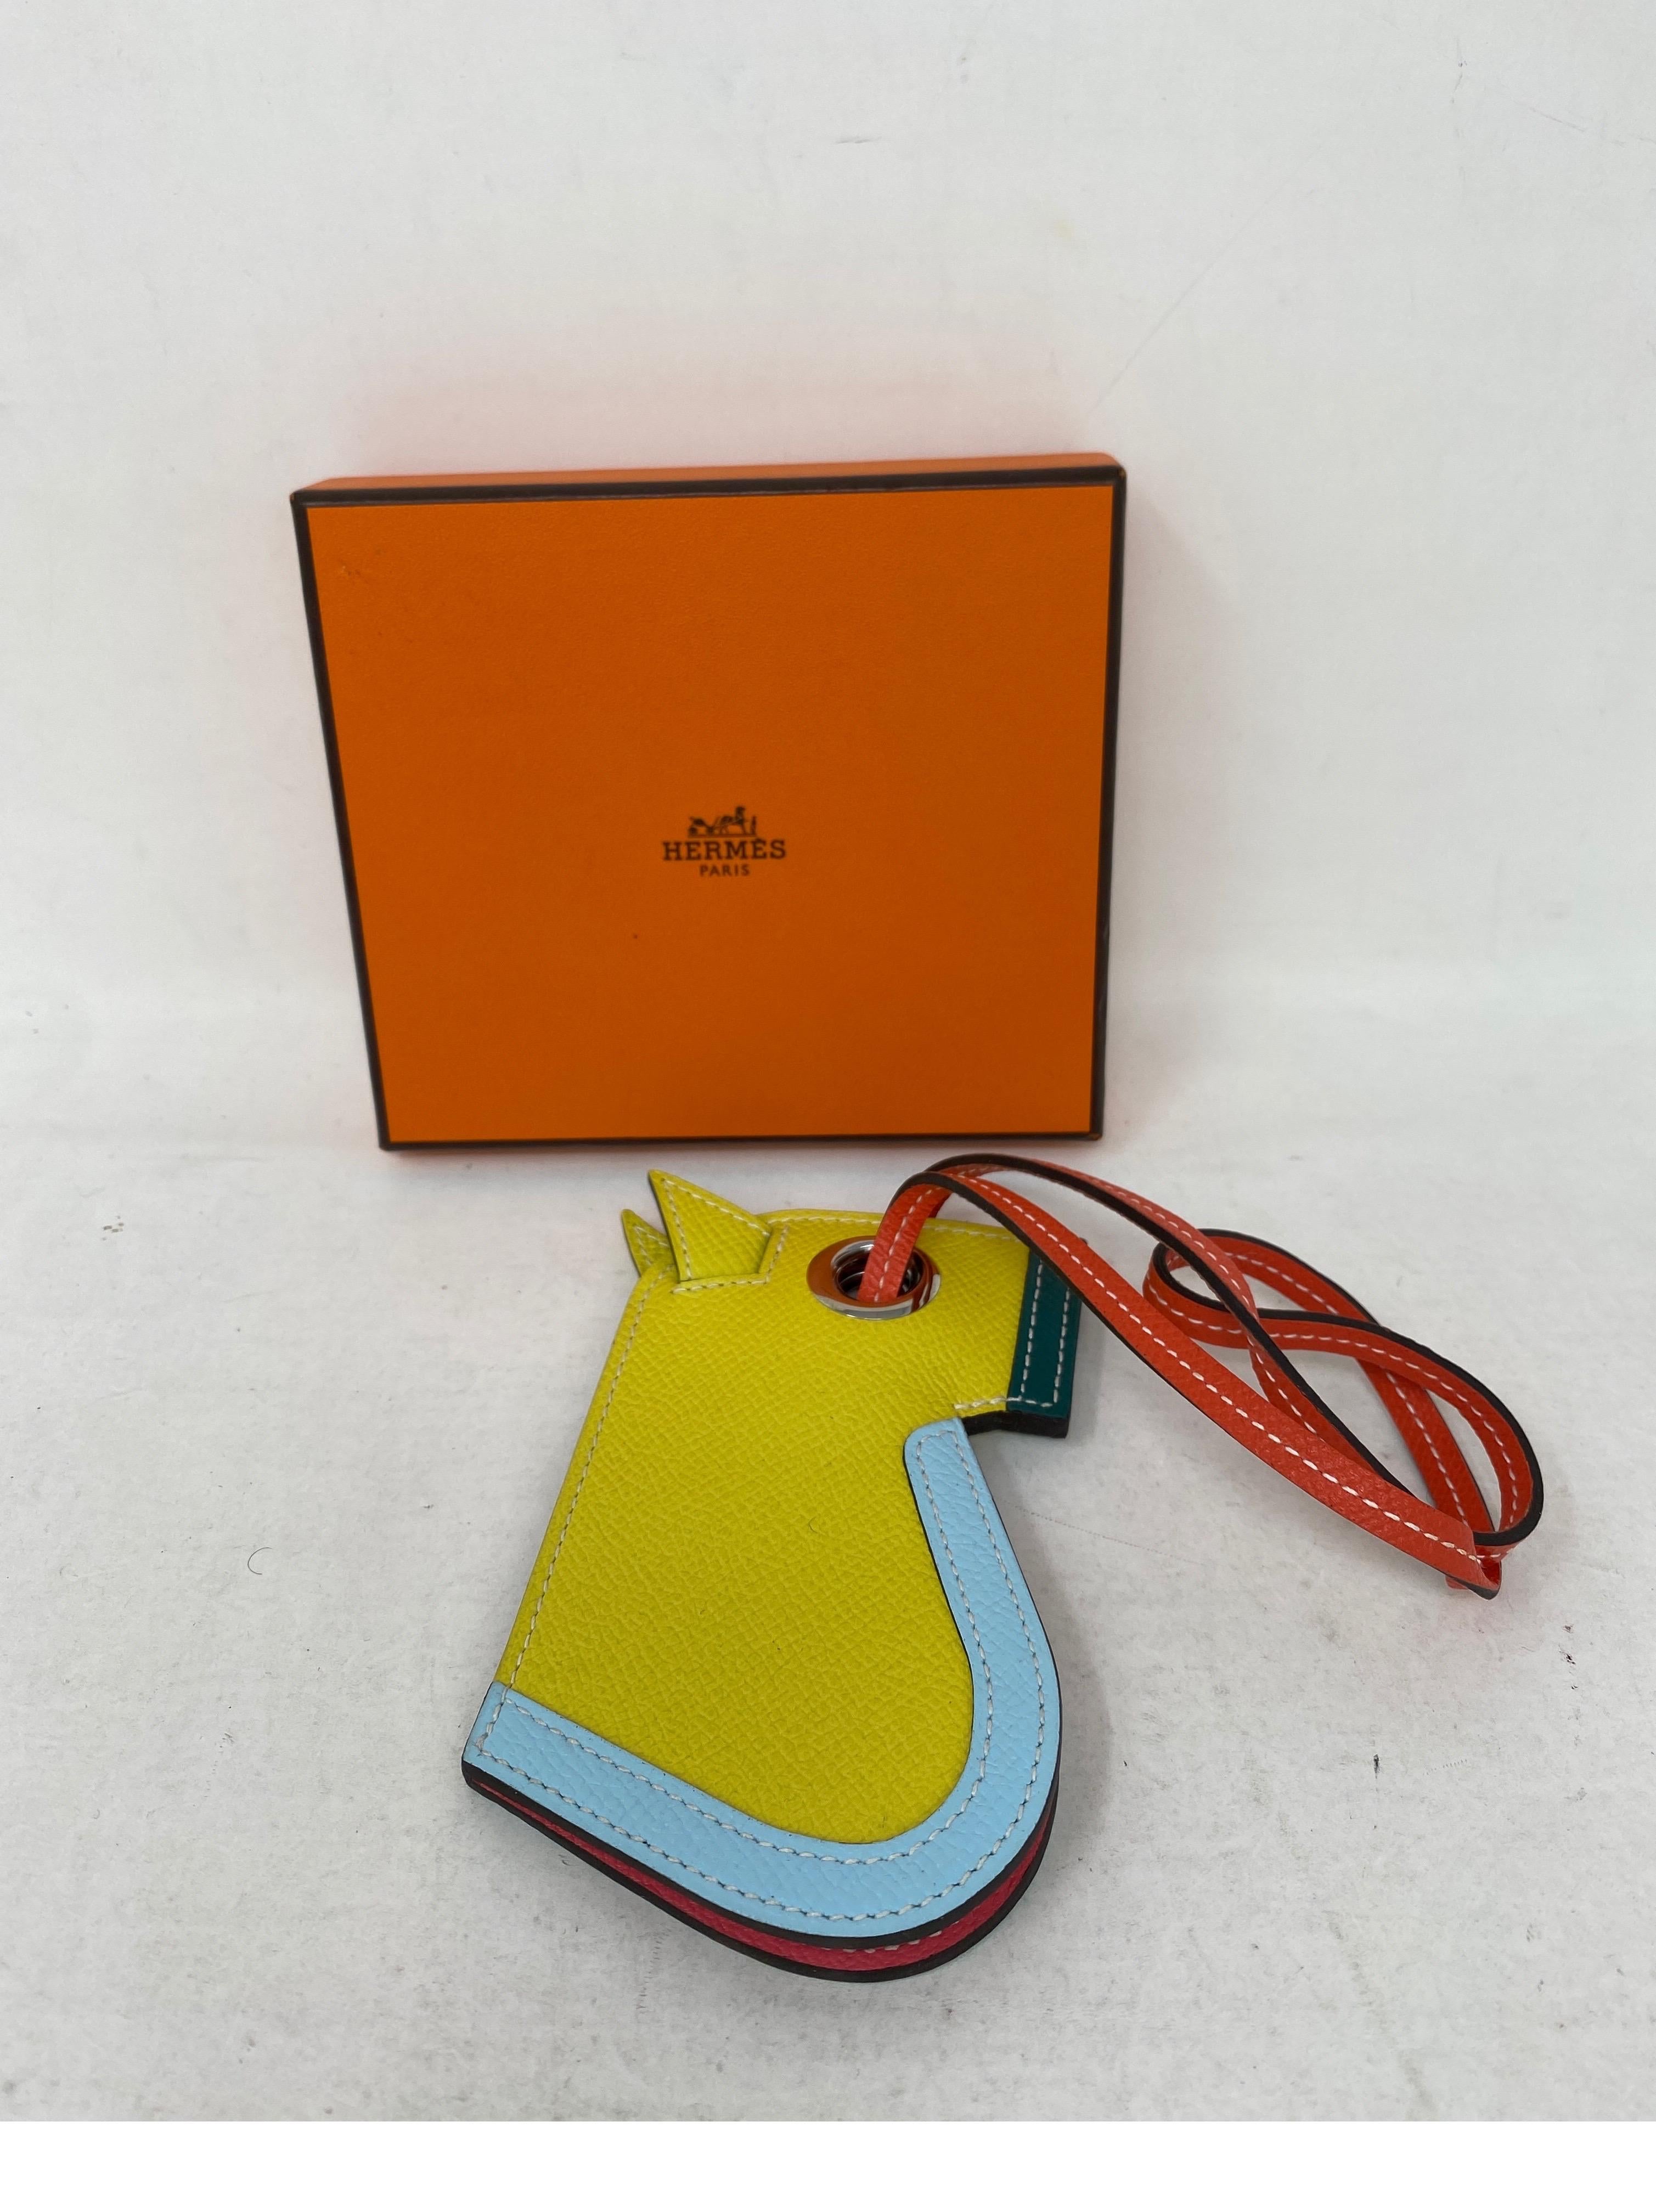 Hermes Yellow Horse Head Purse Charm holder. Mint new condition charm for bags. Guaranteed authentic. 